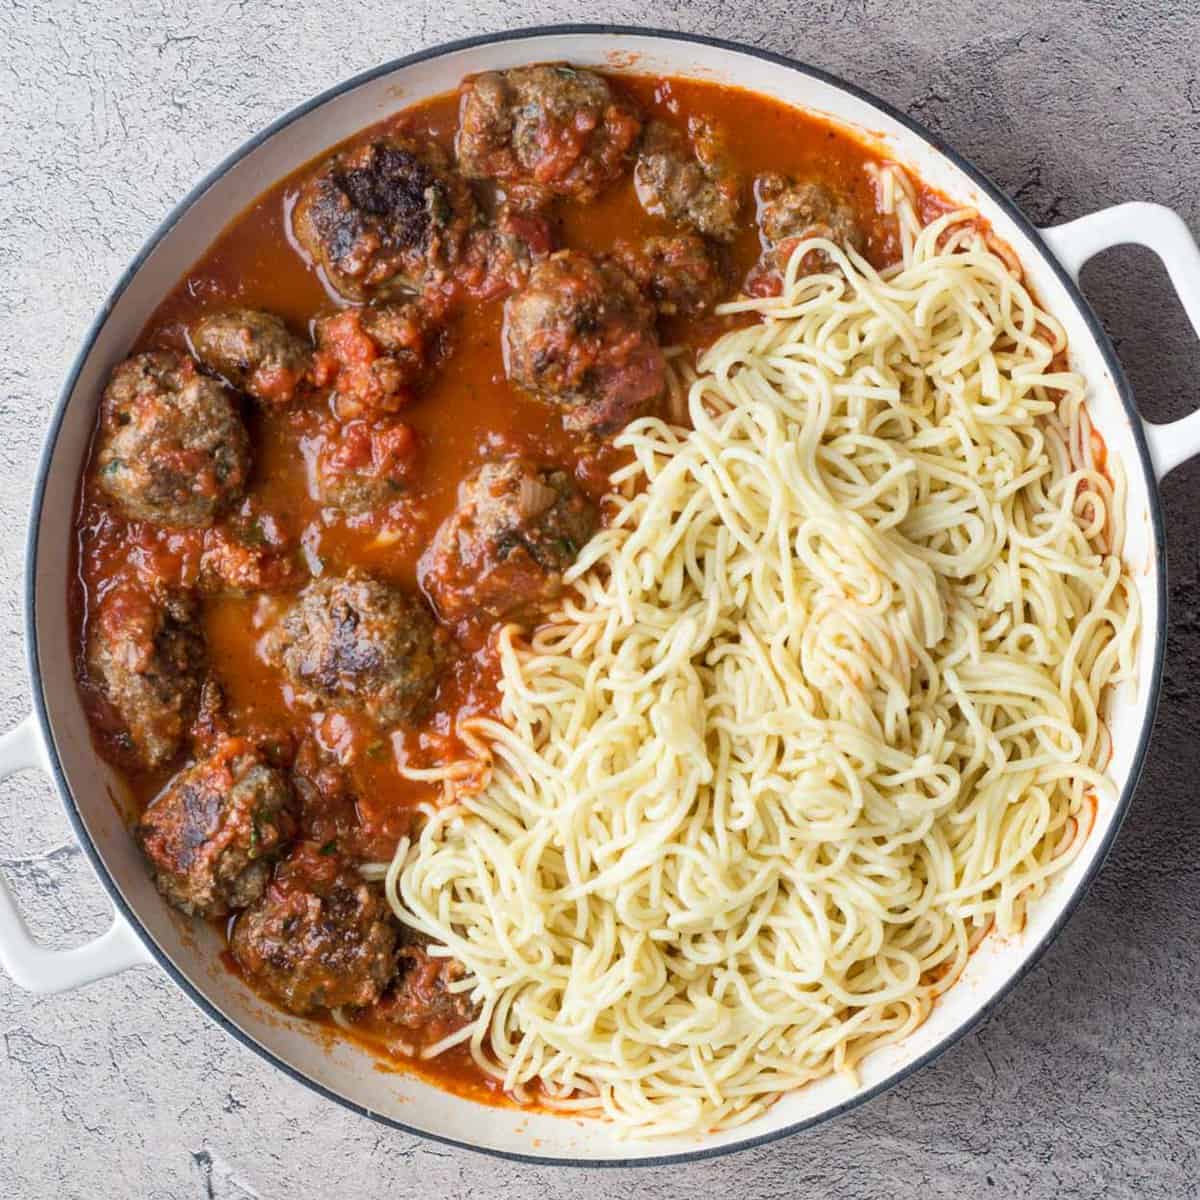 The meatballs are added to the sauce, along with the spaghetti. 